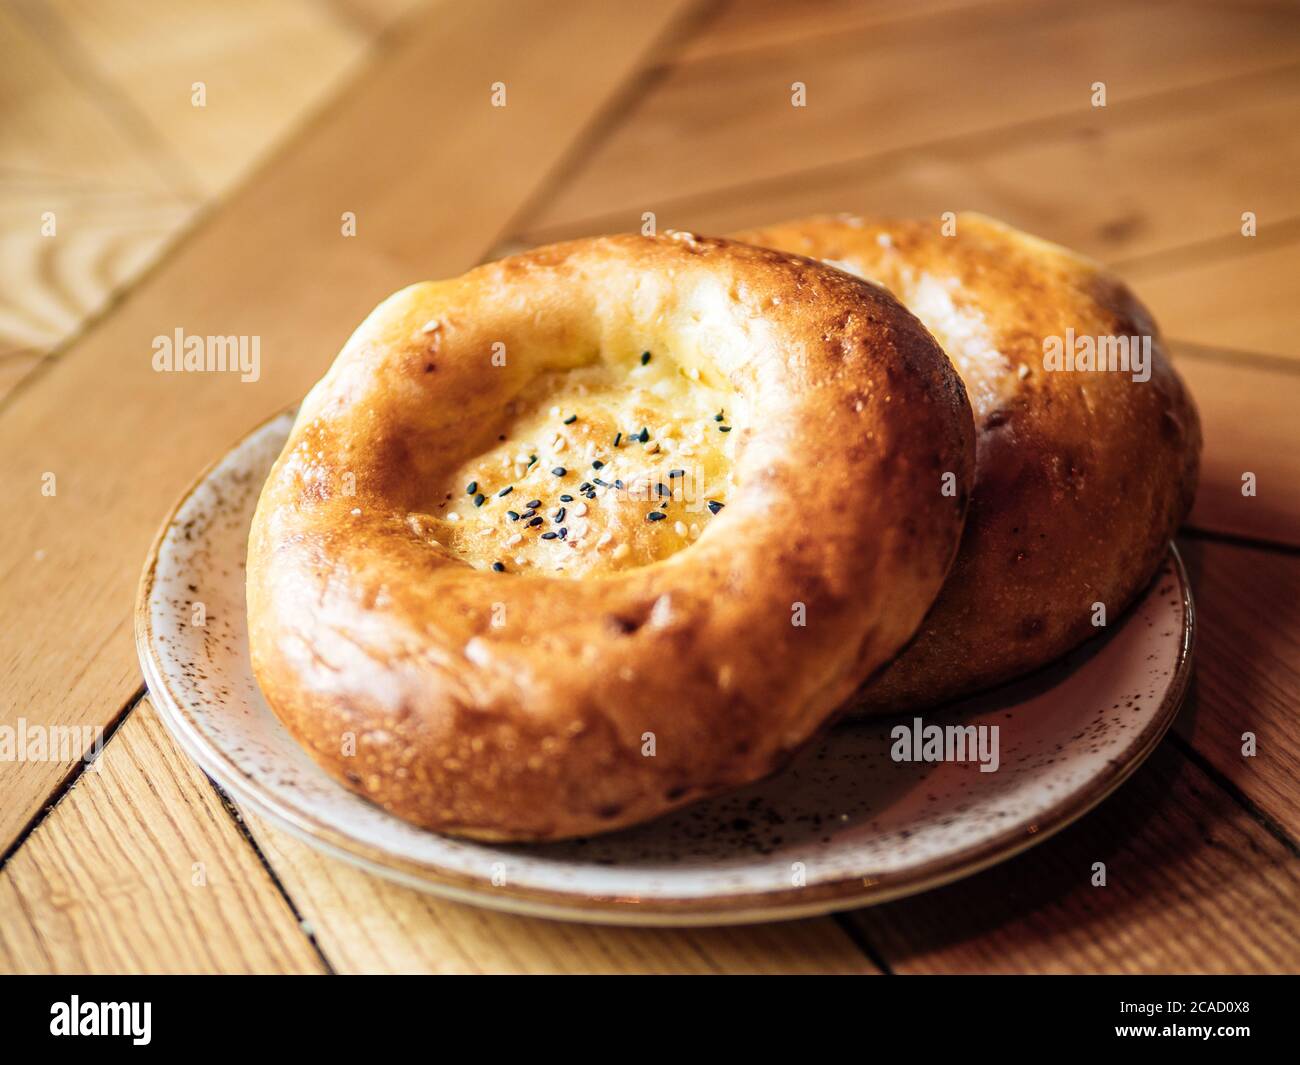 Tasty fresh tandoor bread on rustic wooden tabletop. Two tandoor flat bread cake with black sesame seeds on yellow wooden table background. National asian meal and food Stock Photo